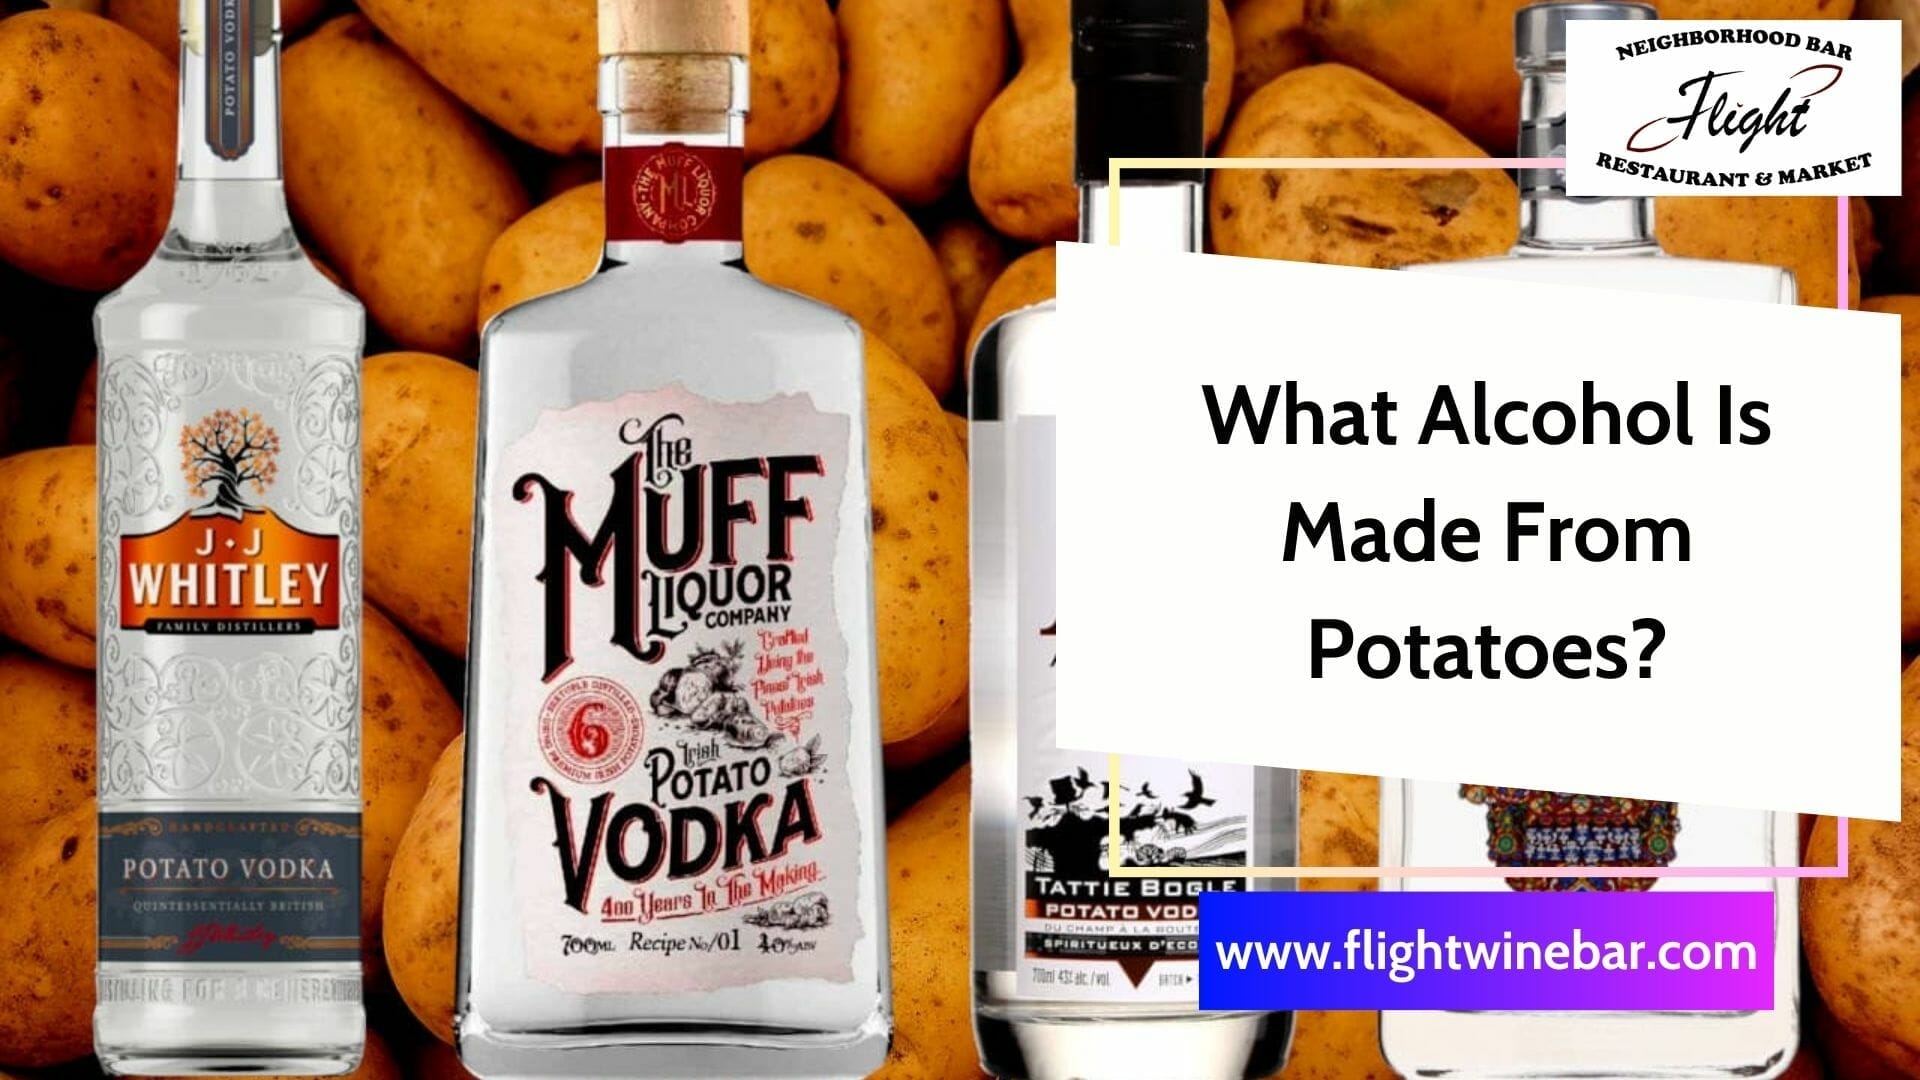 What Alcohol Is Made From Potatoes